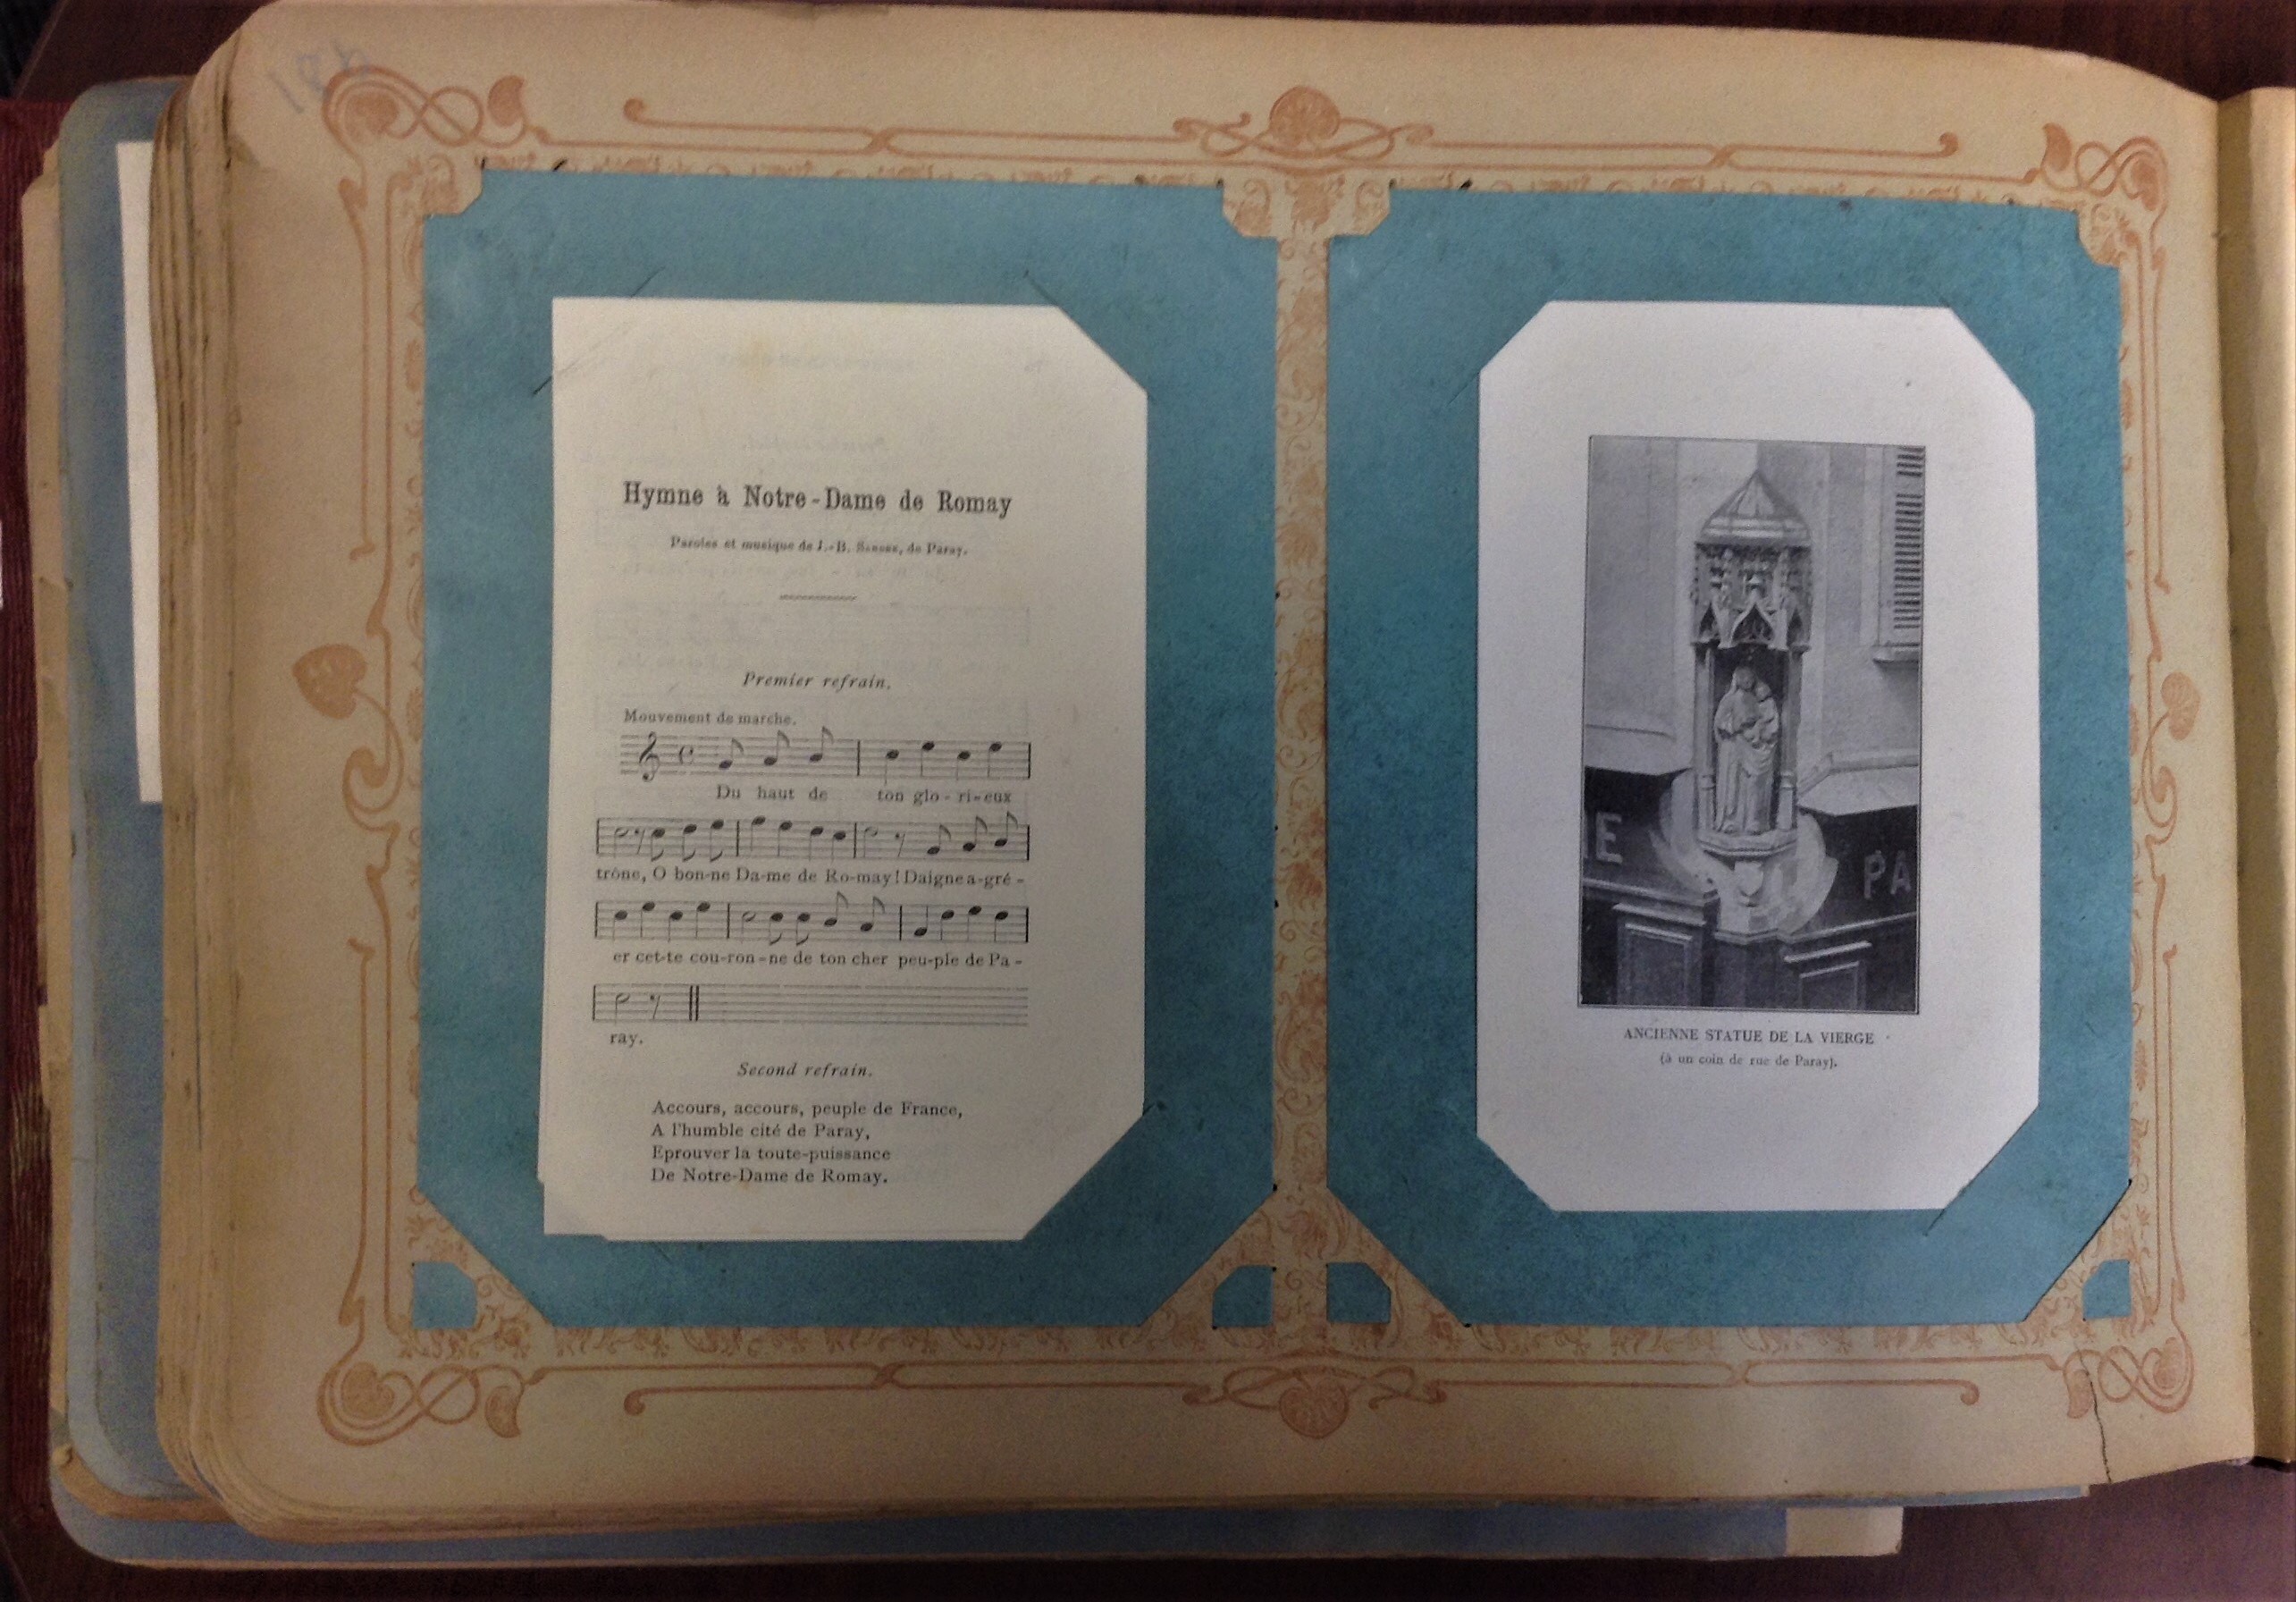 Page with hymn sheet music on the left and photograph of statue on the right